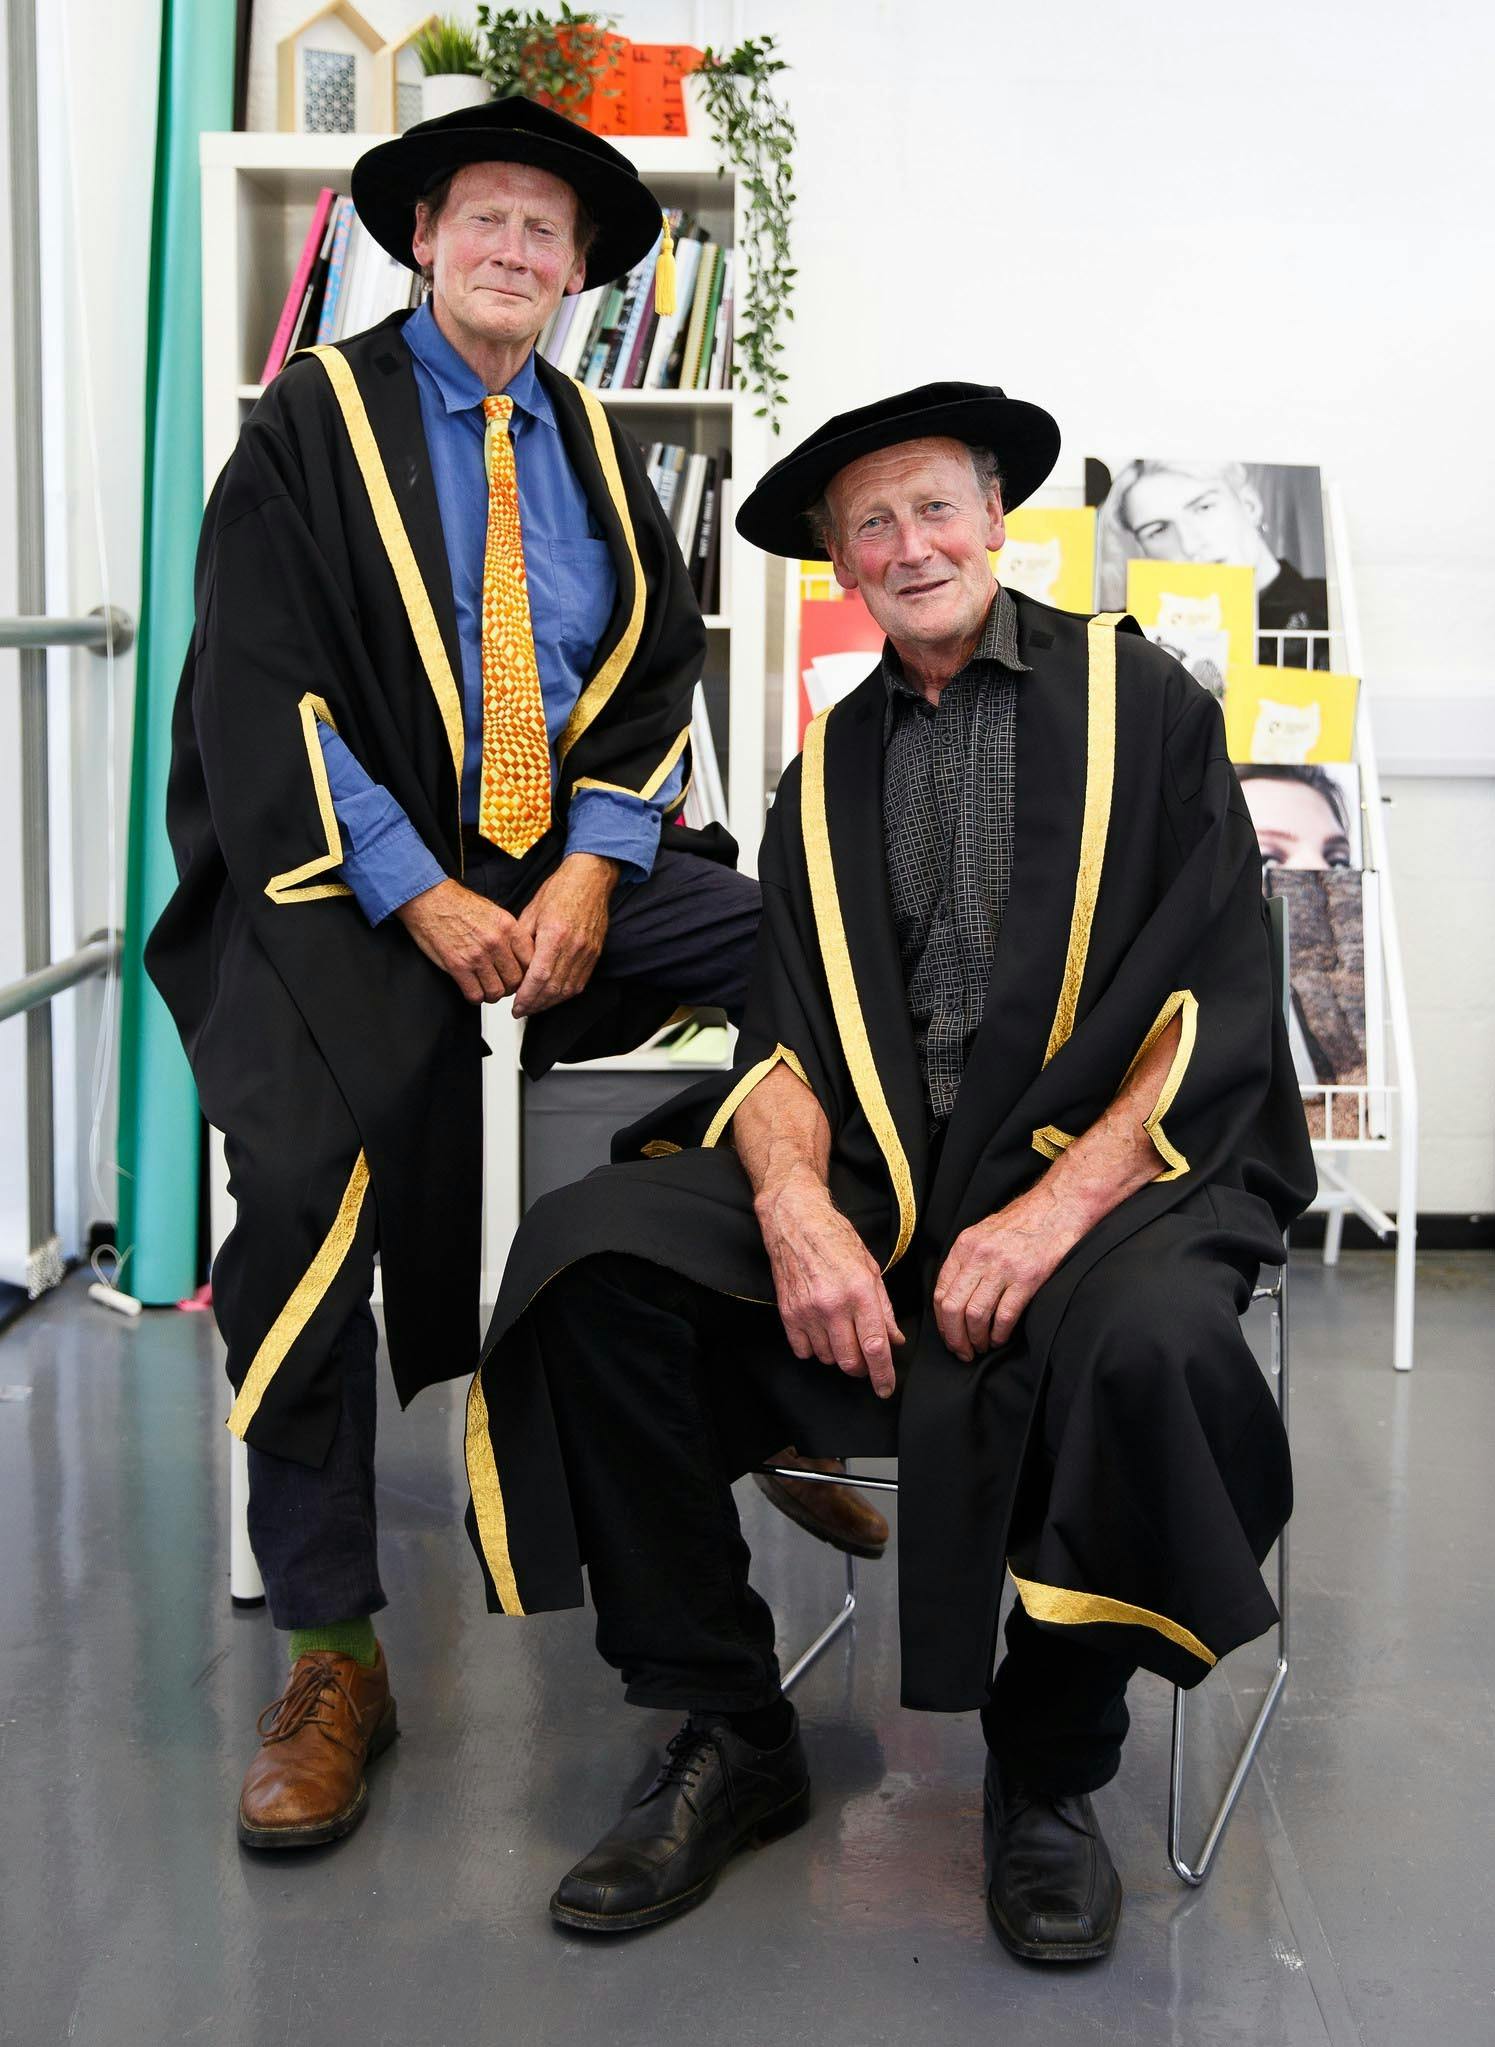 Arts University Plymouth Honorary Fellows for 2020 Tim and Chris Britton